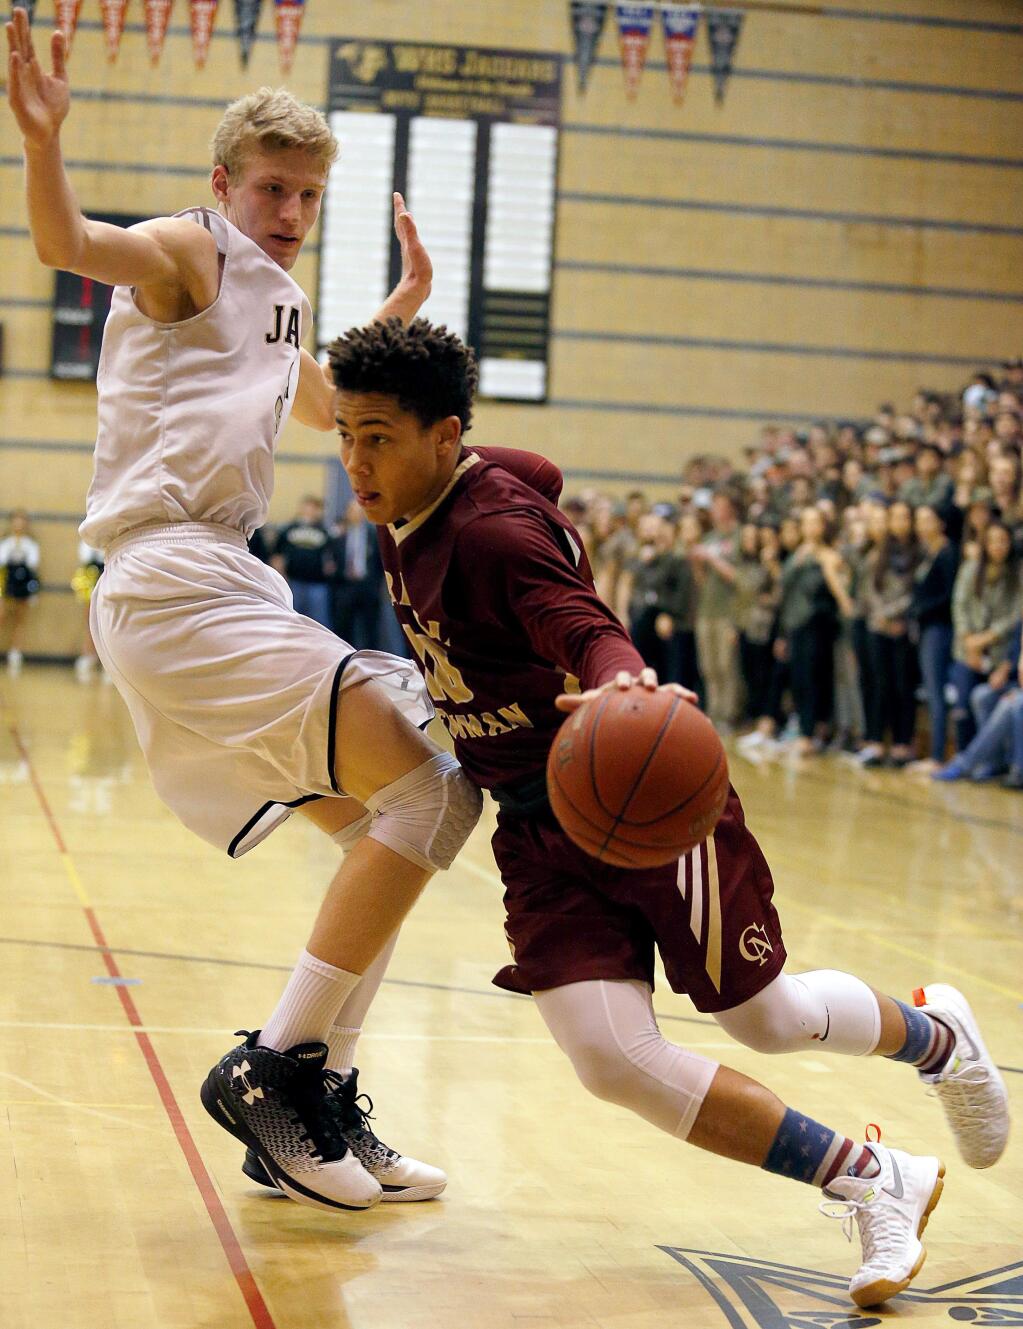 Cardinal Newman's Damian Wallace (10), right, drives to the basketb around Windsor's Riley Smith (33) during the second half of a boys varsity basketball game between Cardinal Newman and Windsor high schools in Windsor, California on Thursday, January 19, 2017. (Alvin Jornada / The Press Democrat)